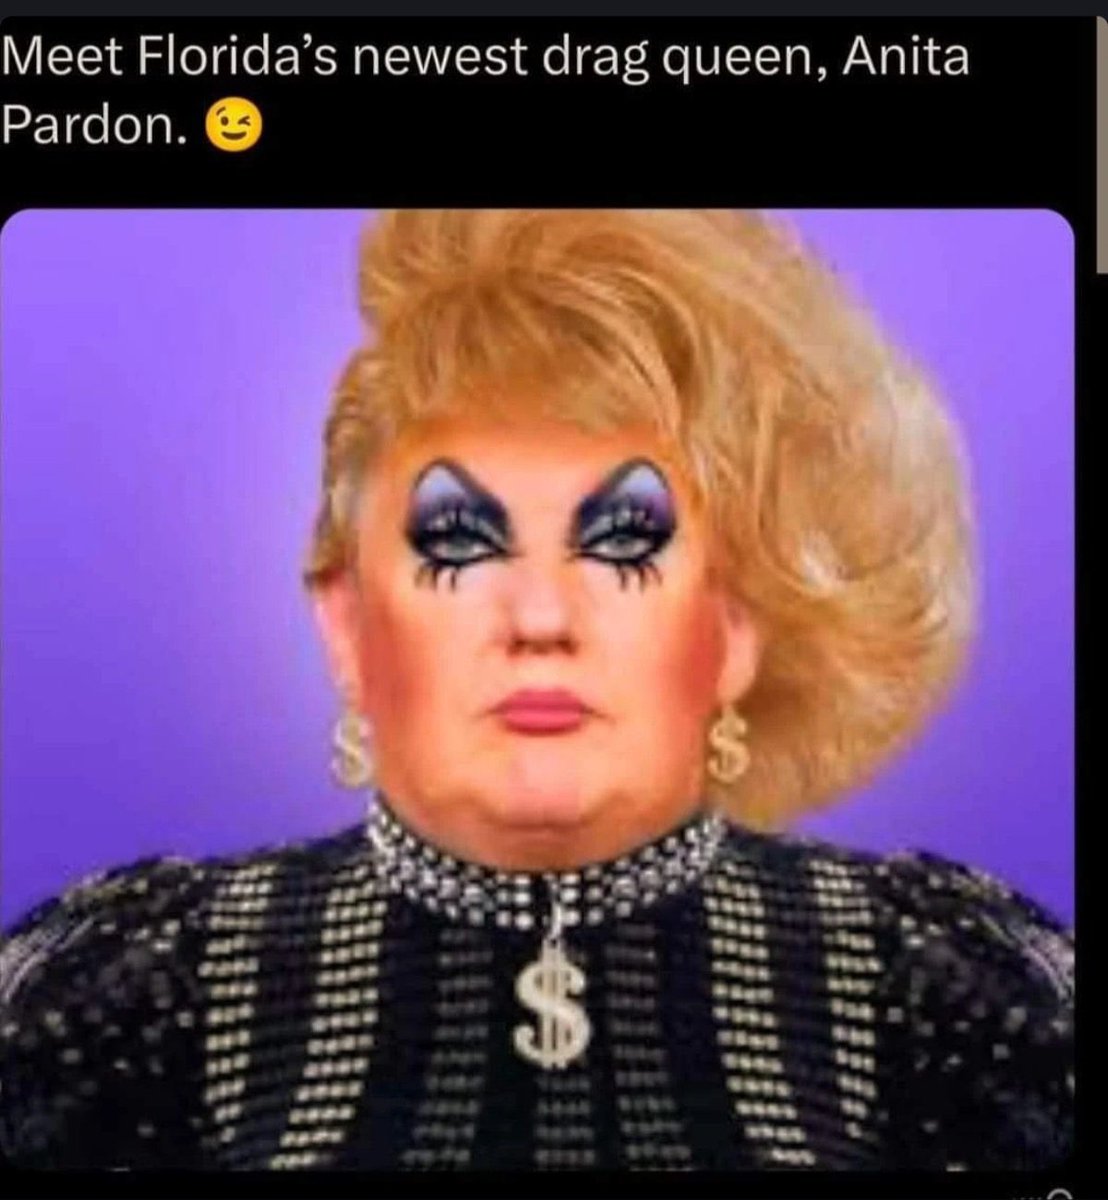 @realTuckFrumper No pardon, the best punishment/reform Donald could have is a short stint in prison participating in their televised Prison Drag show